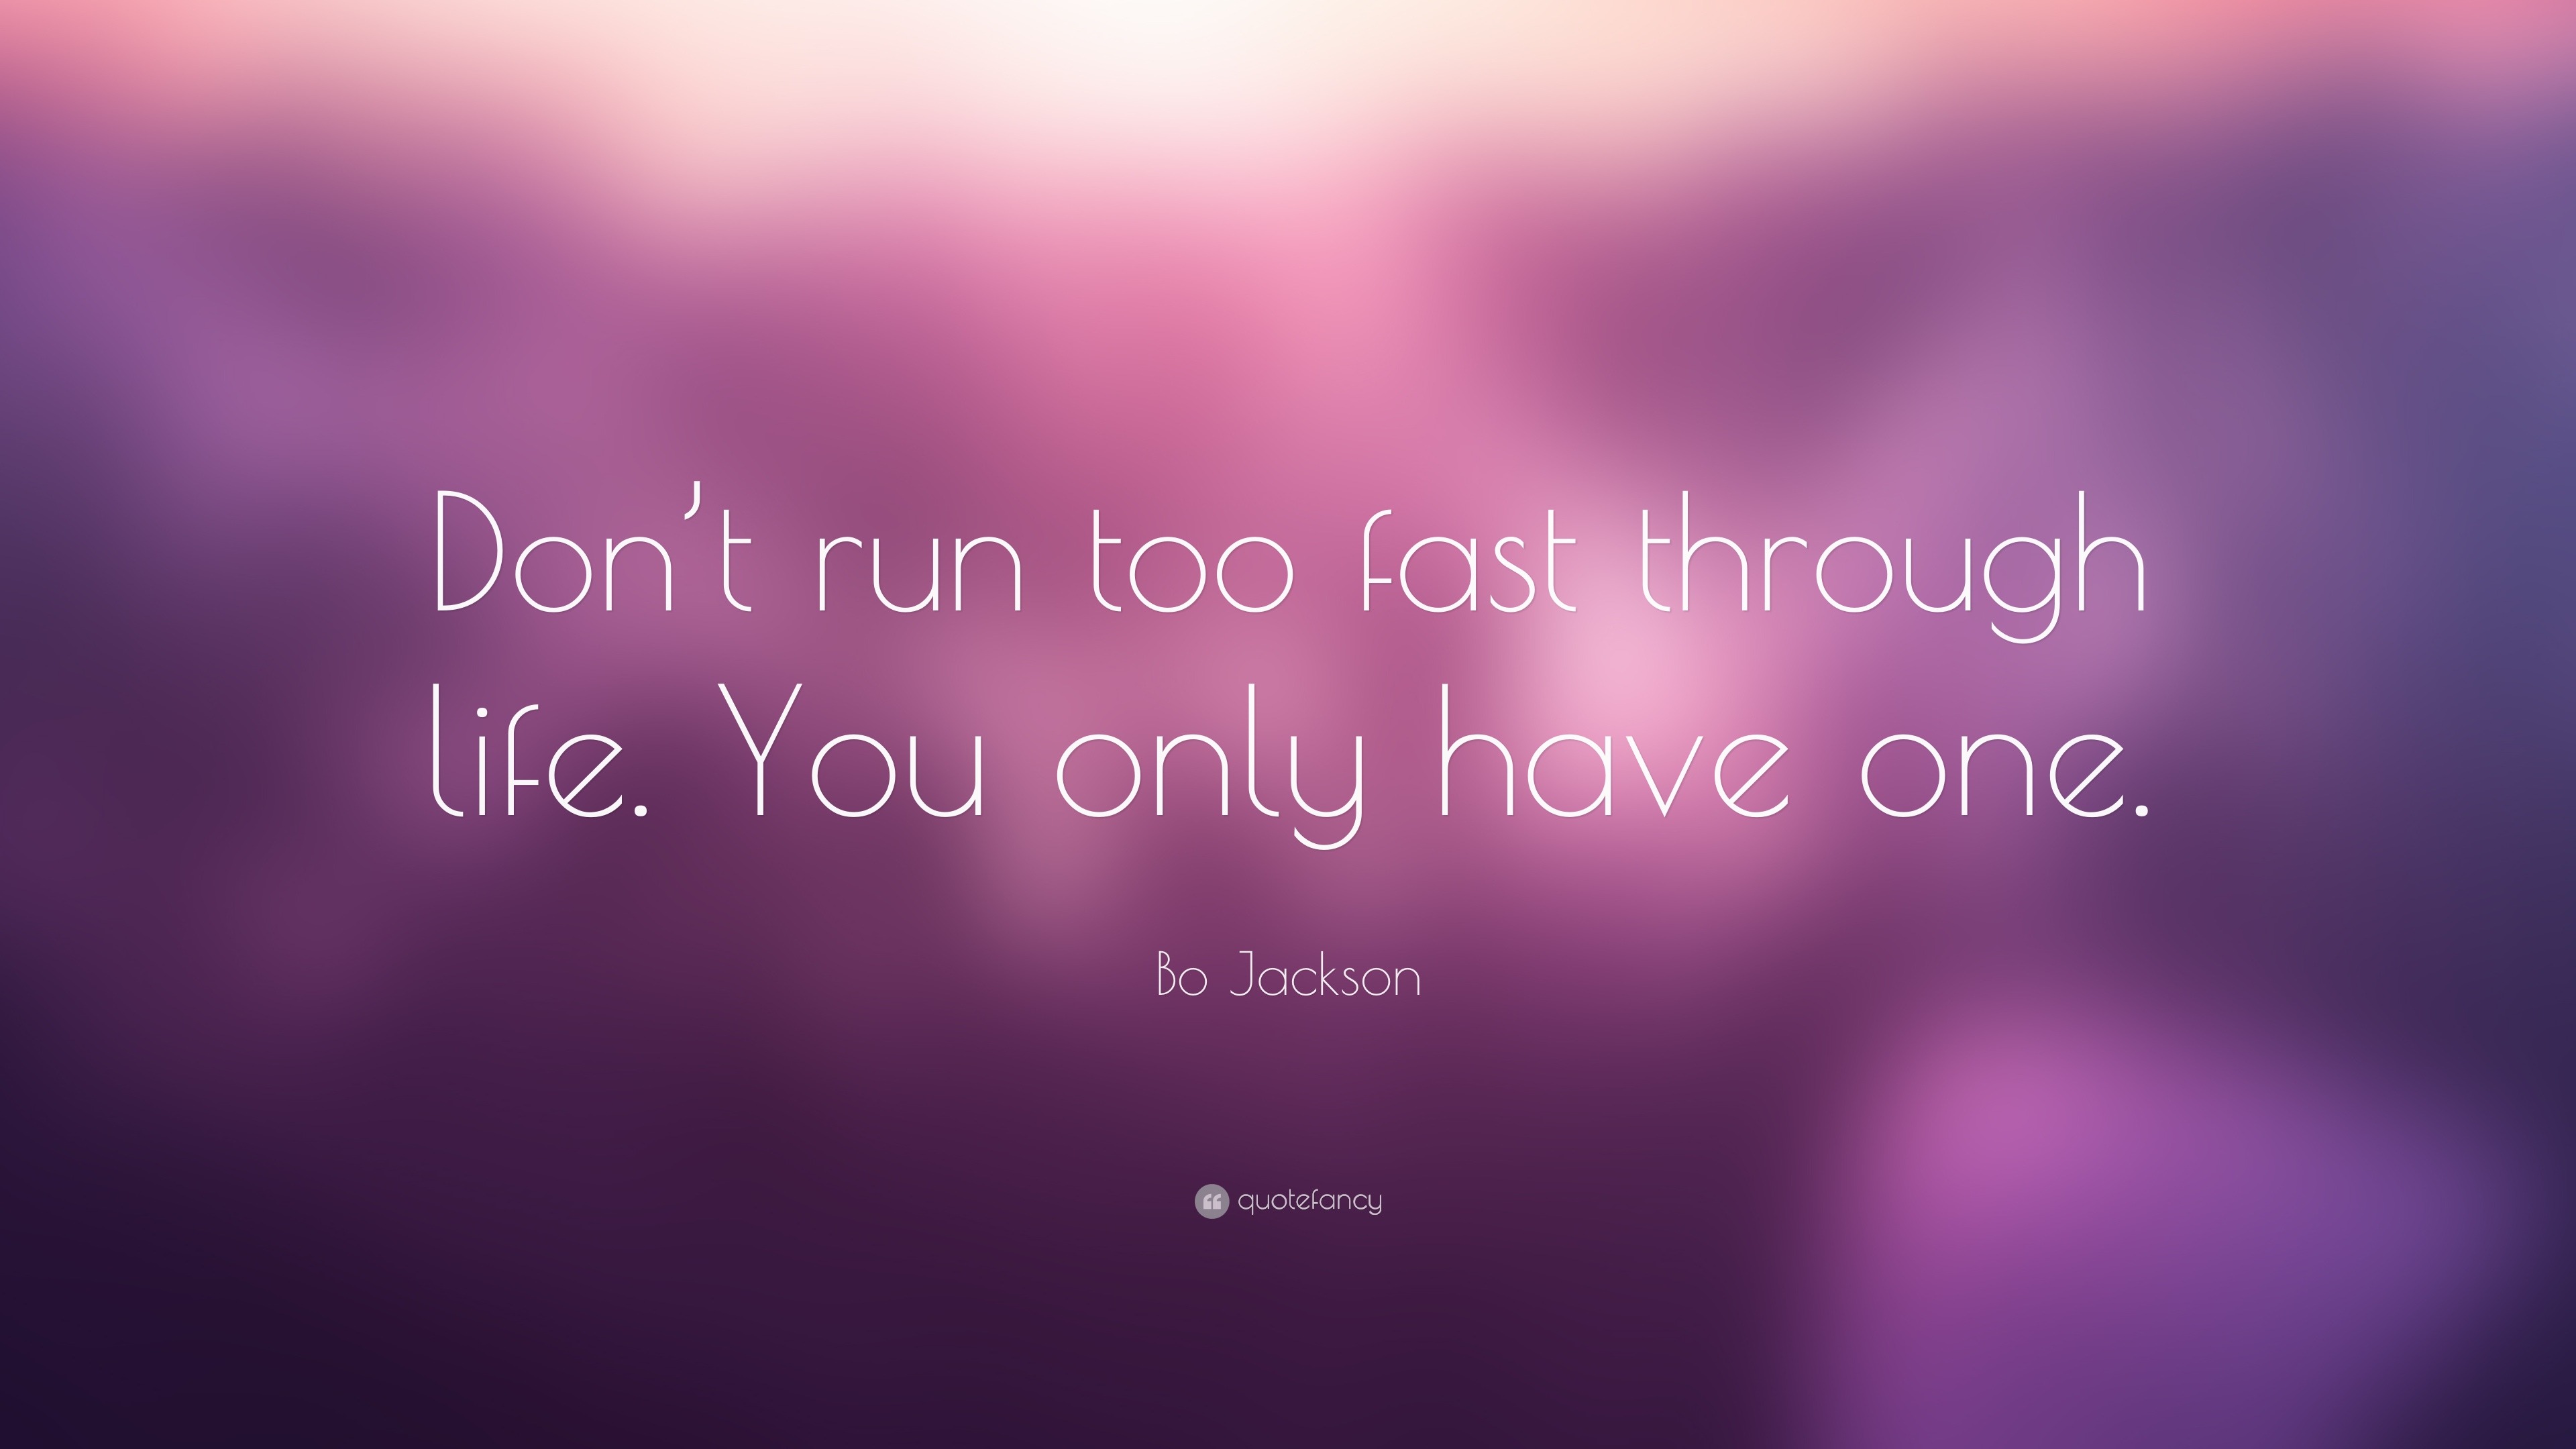 Bo Jackson Quote “Don t run too fast through life You only